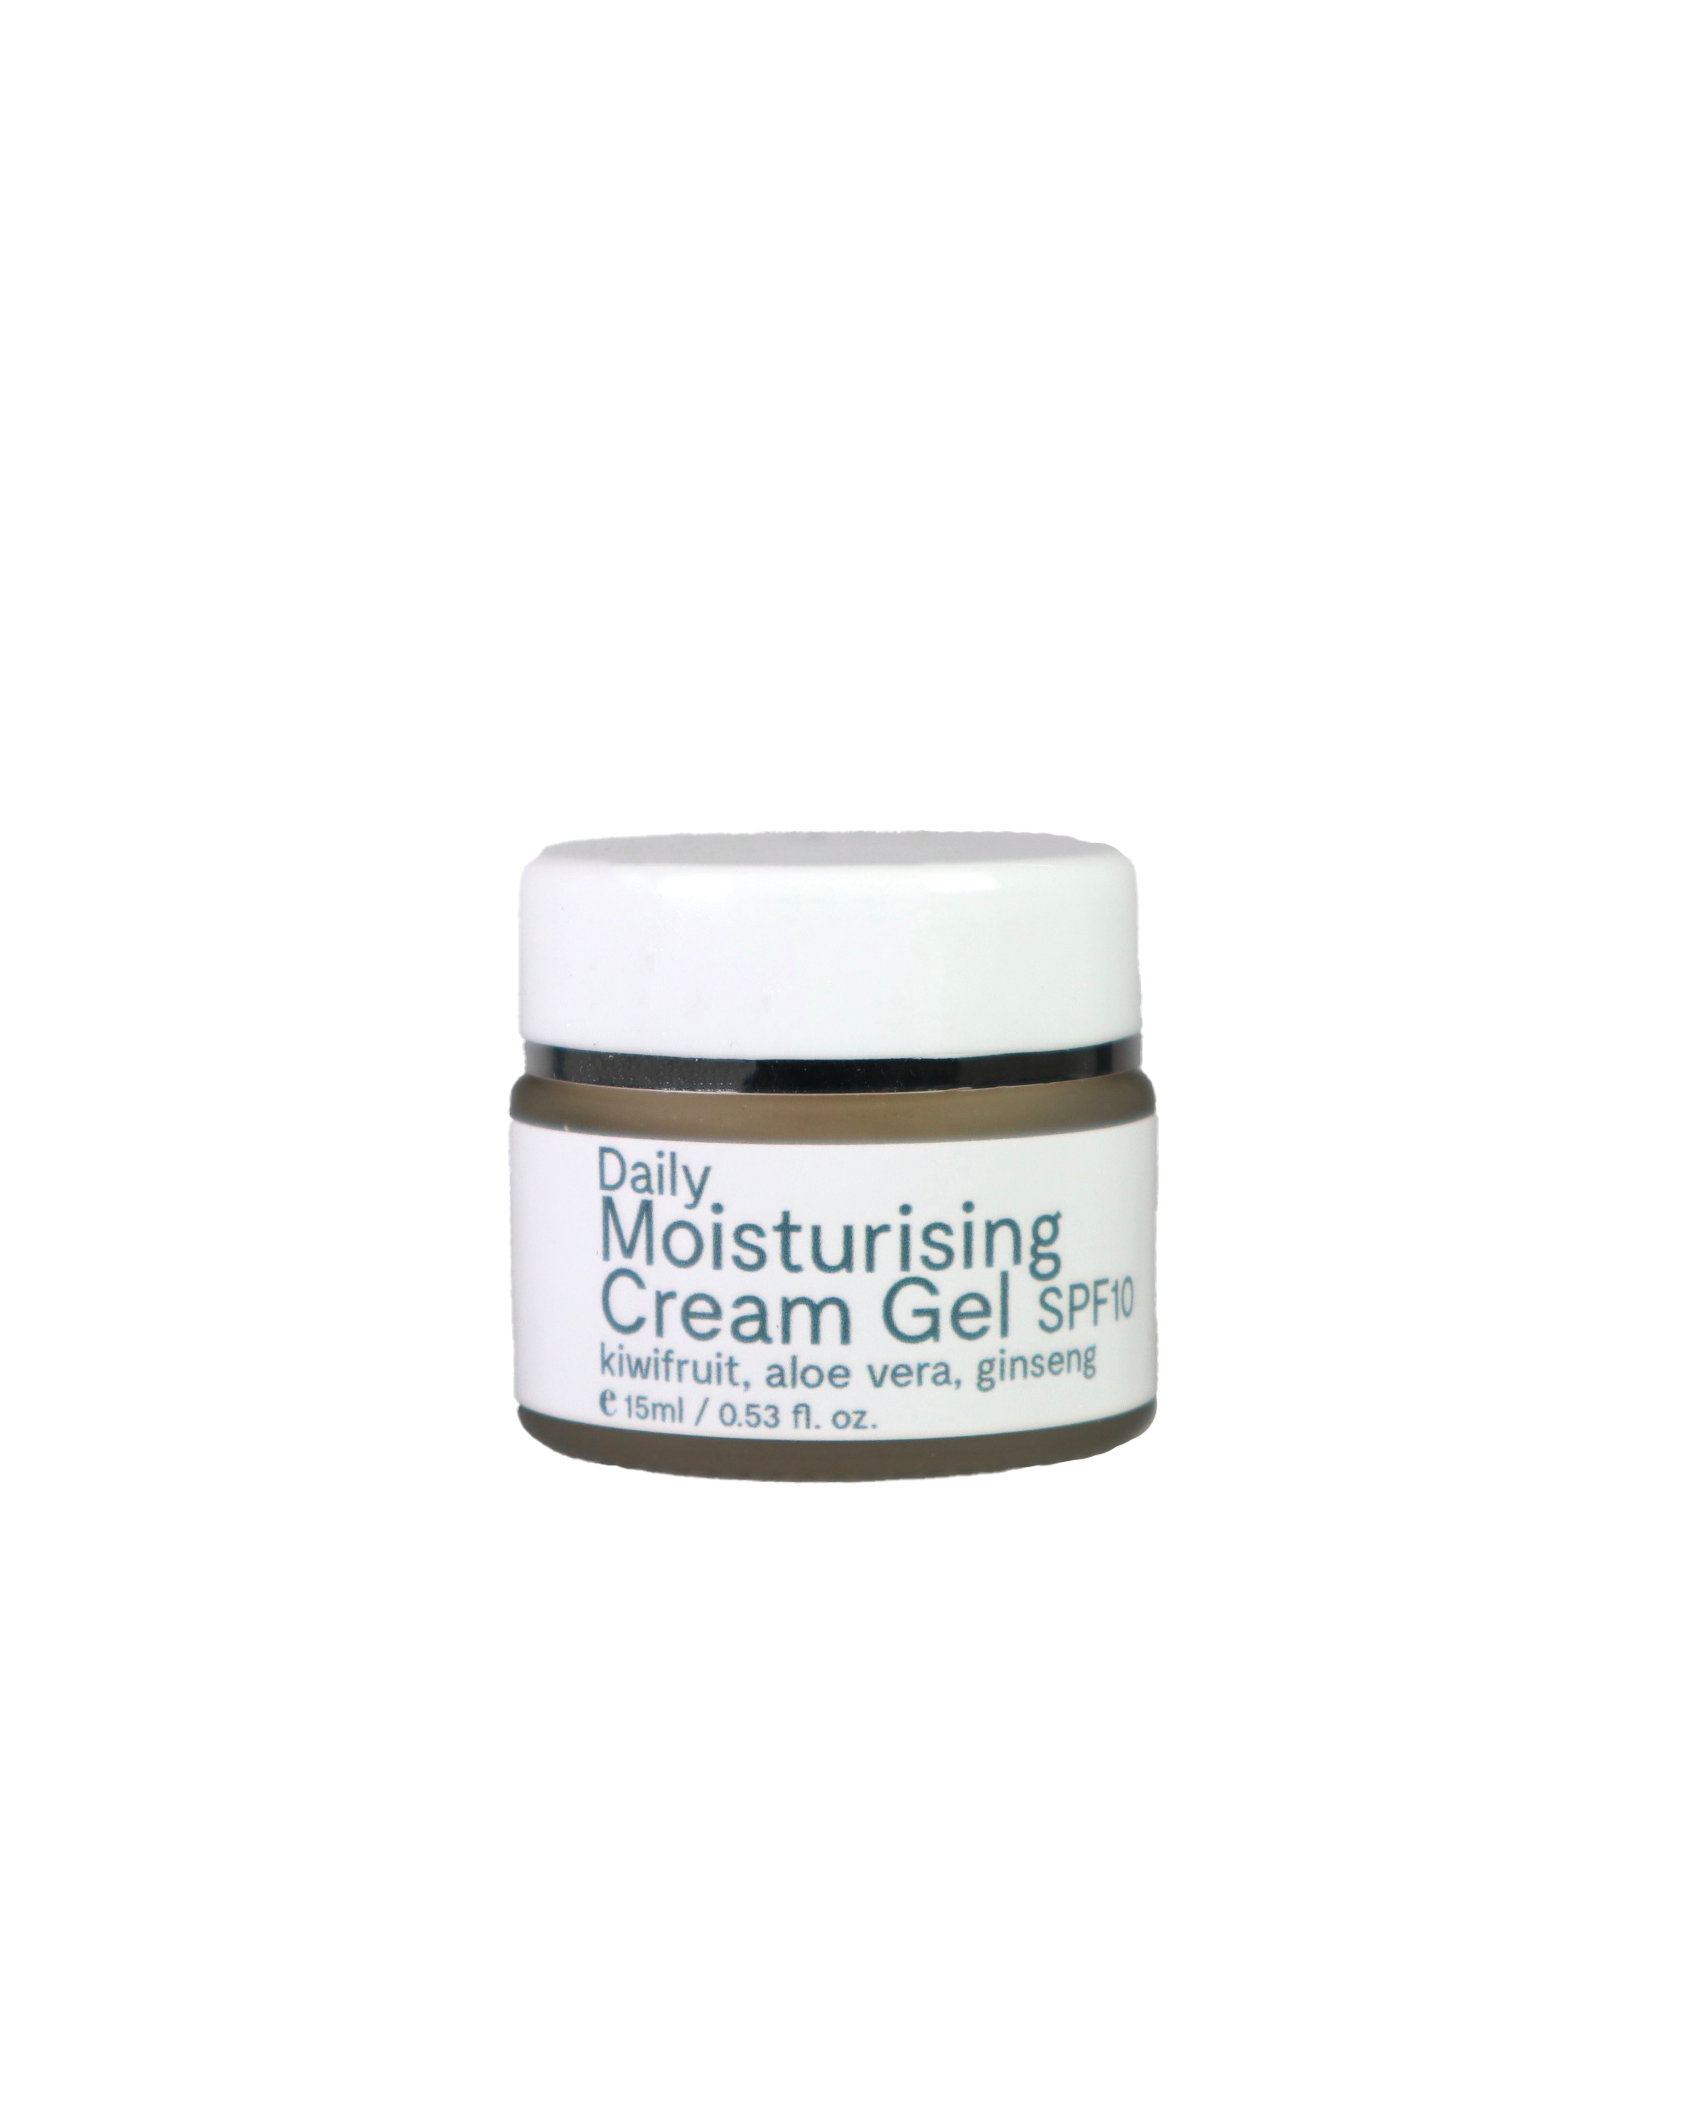 Azurlis™ Daily Moisturising Cream Gel SPF-10 50/30ml is a protective and soothing sunscreen moisturising cream gel for daily use. With nourishing, emollient and anti-oxidant ingredients, to protect against premature ageing, for great looking skin. The natural sunscreen protection of these ingredients is enhanced with zinc oxide to SPF - 10 level.